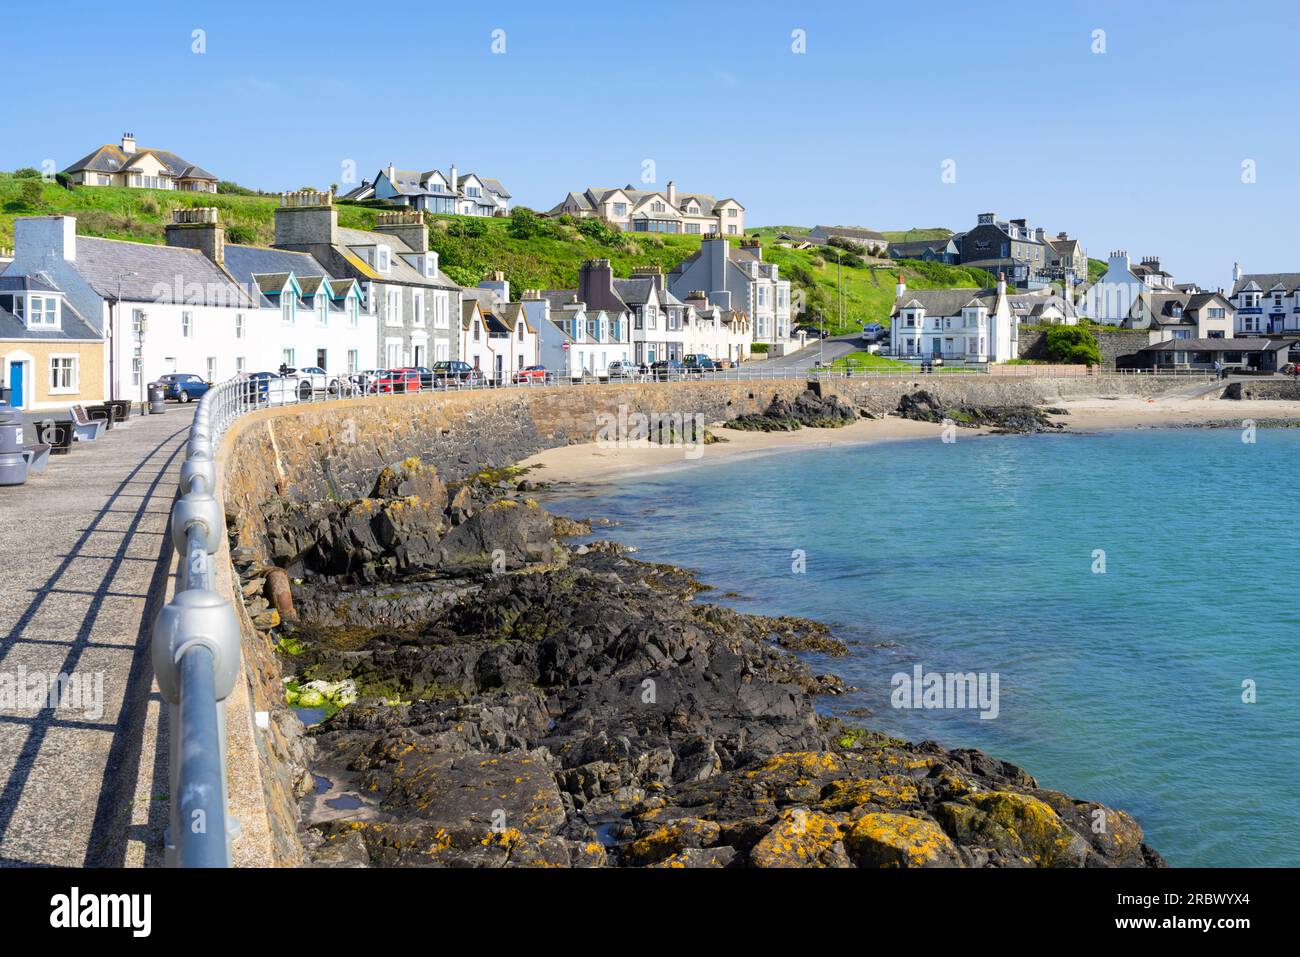 Portpatrick village harbour seafront and beach Portpatrick Rhins of Galloway peninsula Dumfries and Galloway Scotland UK GB Europe Stock Photo